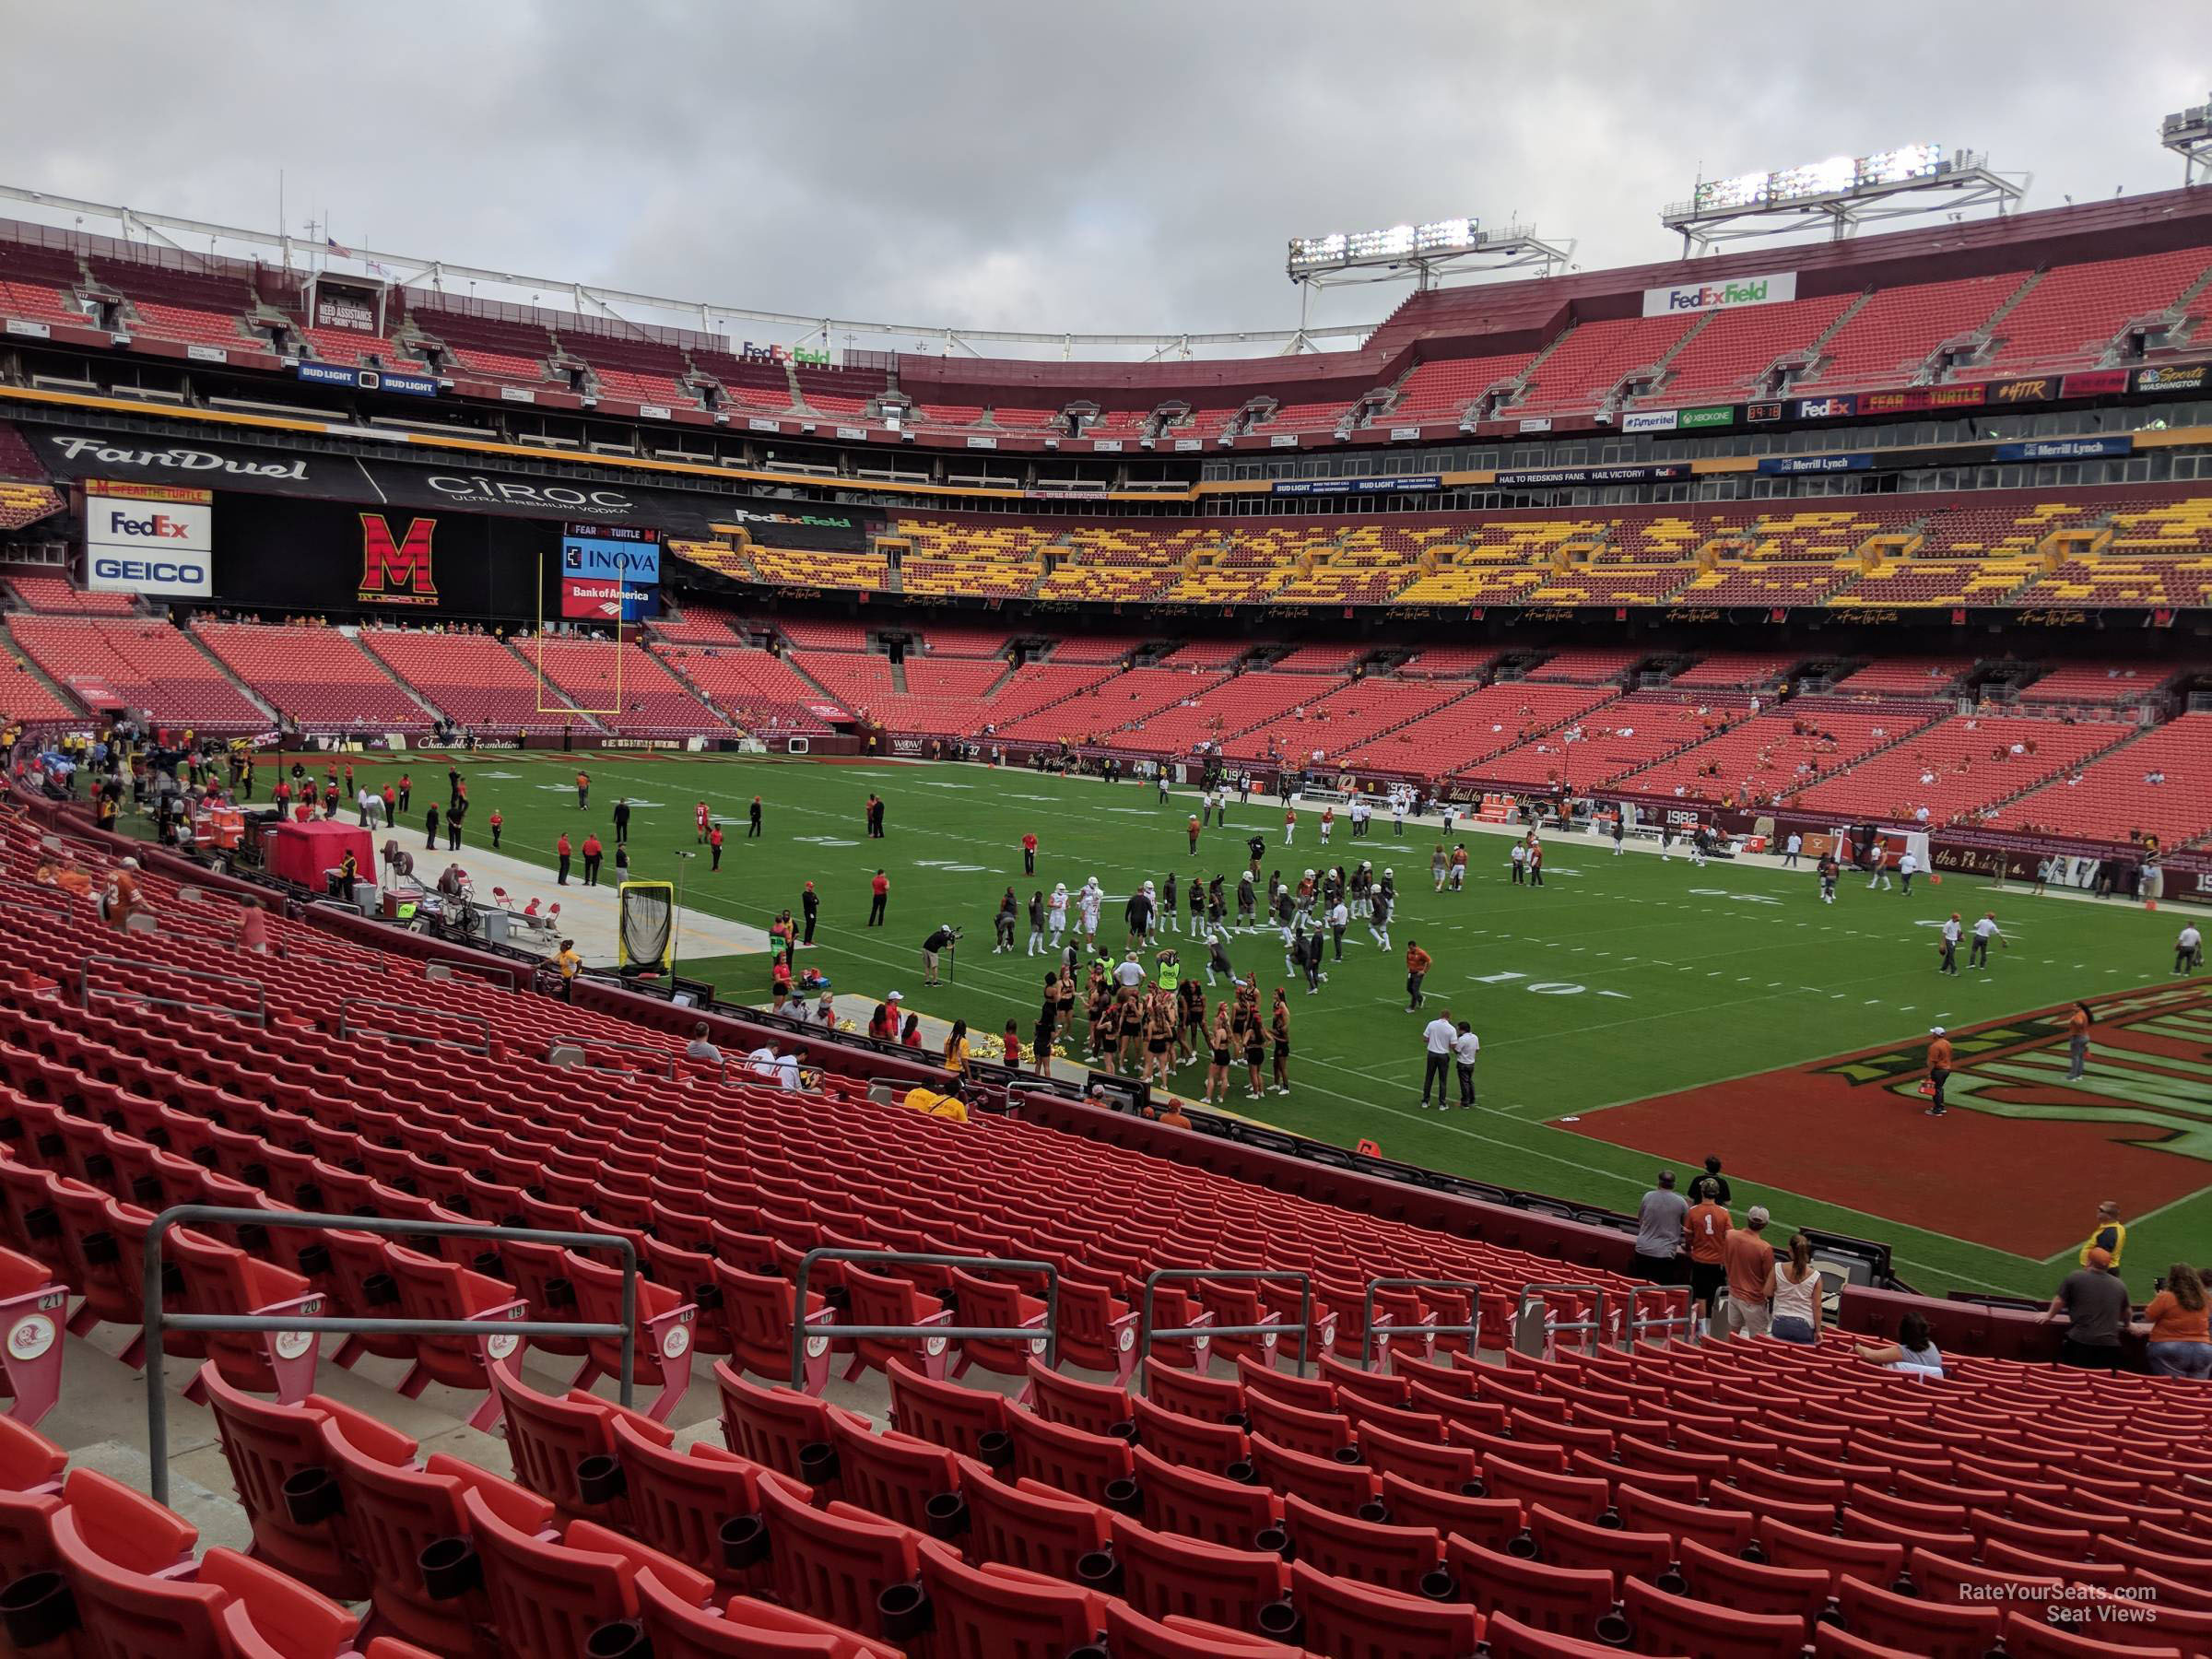 section 137, row 25 seat view  - fedexfield